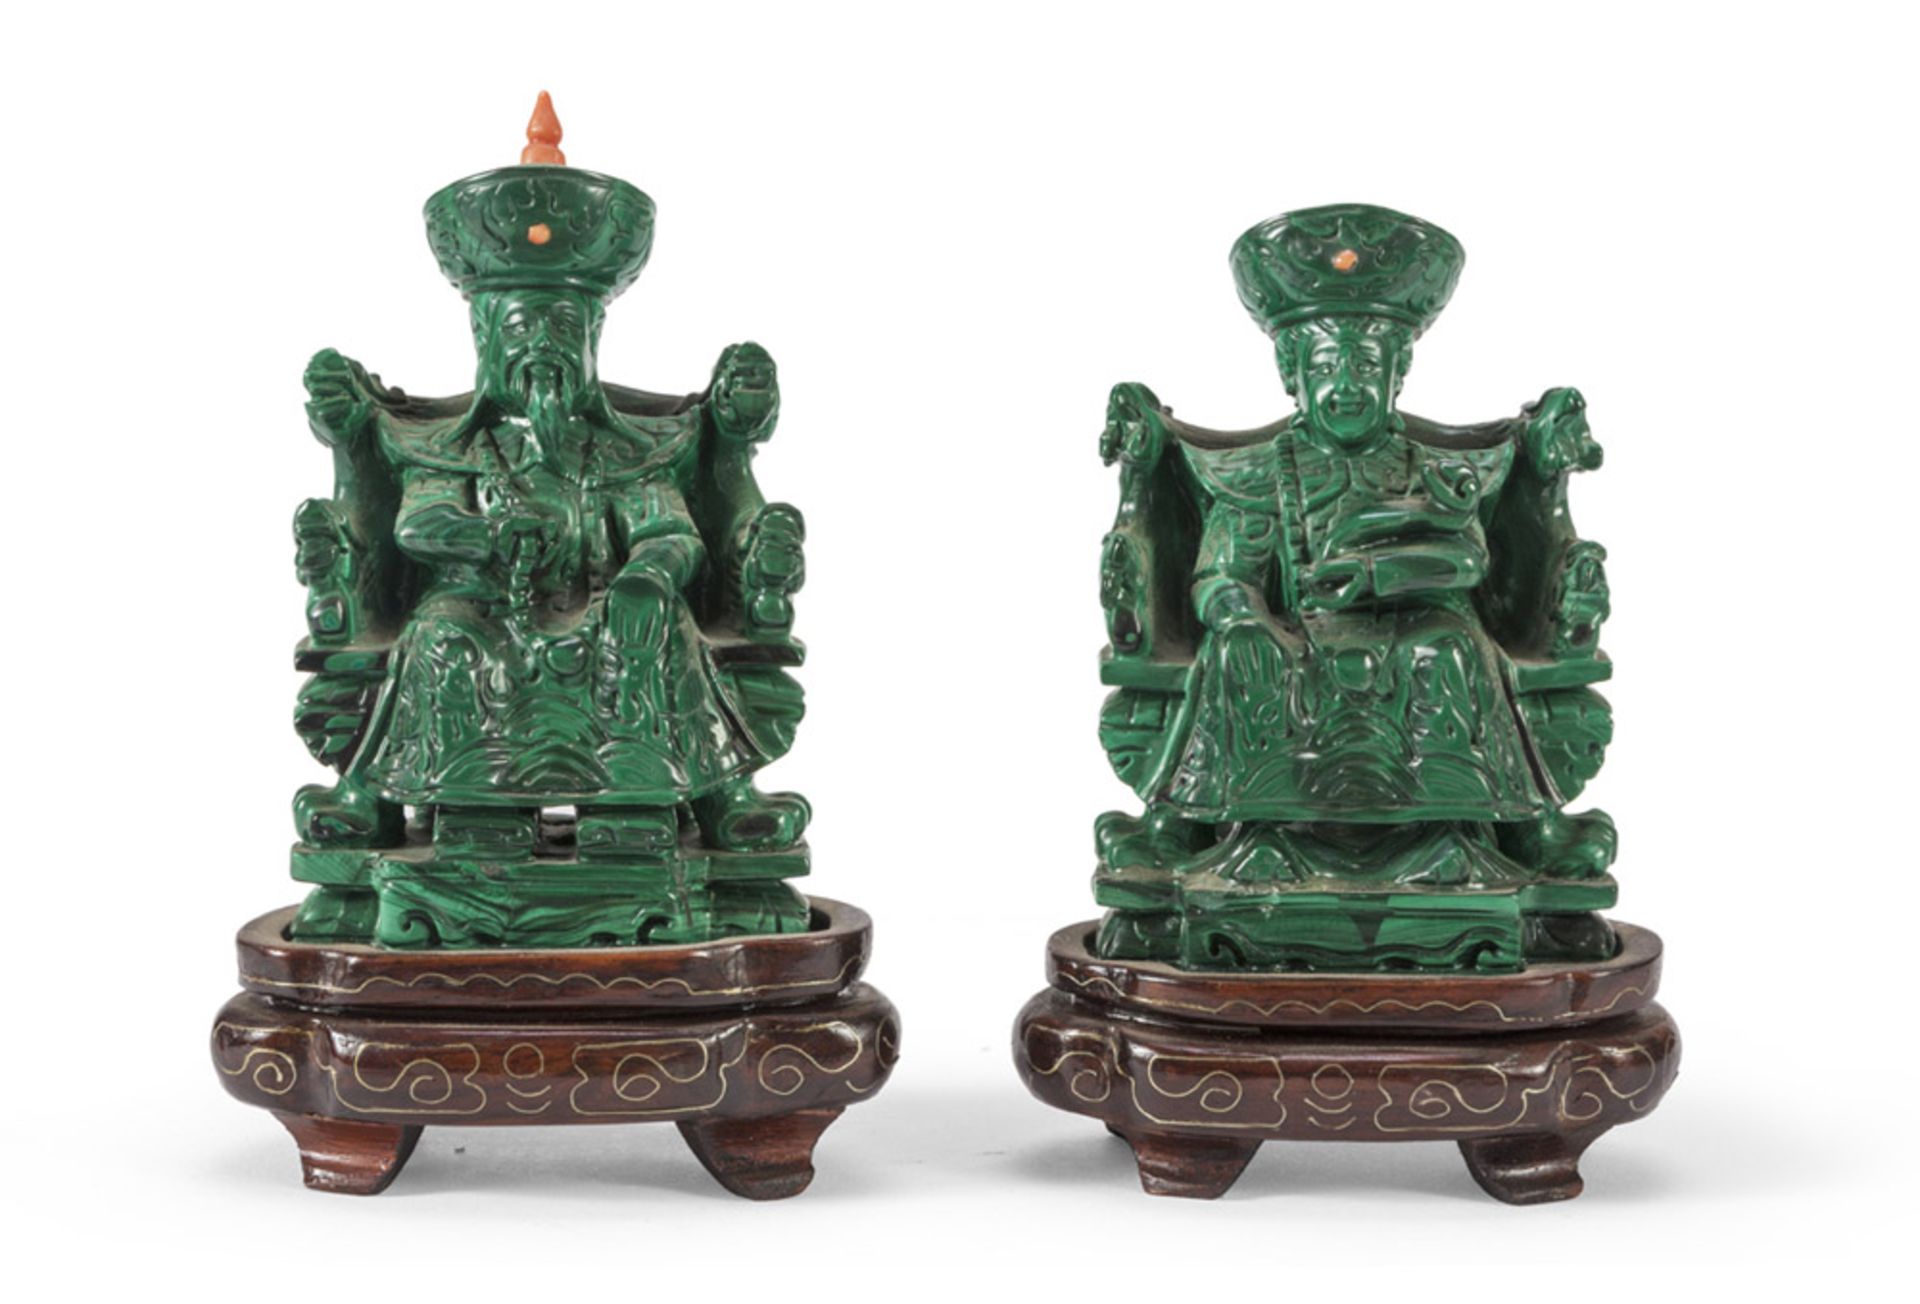 A PAIR OF MALACHITE SCULPTURES, CHINA, 20TH CENTURY